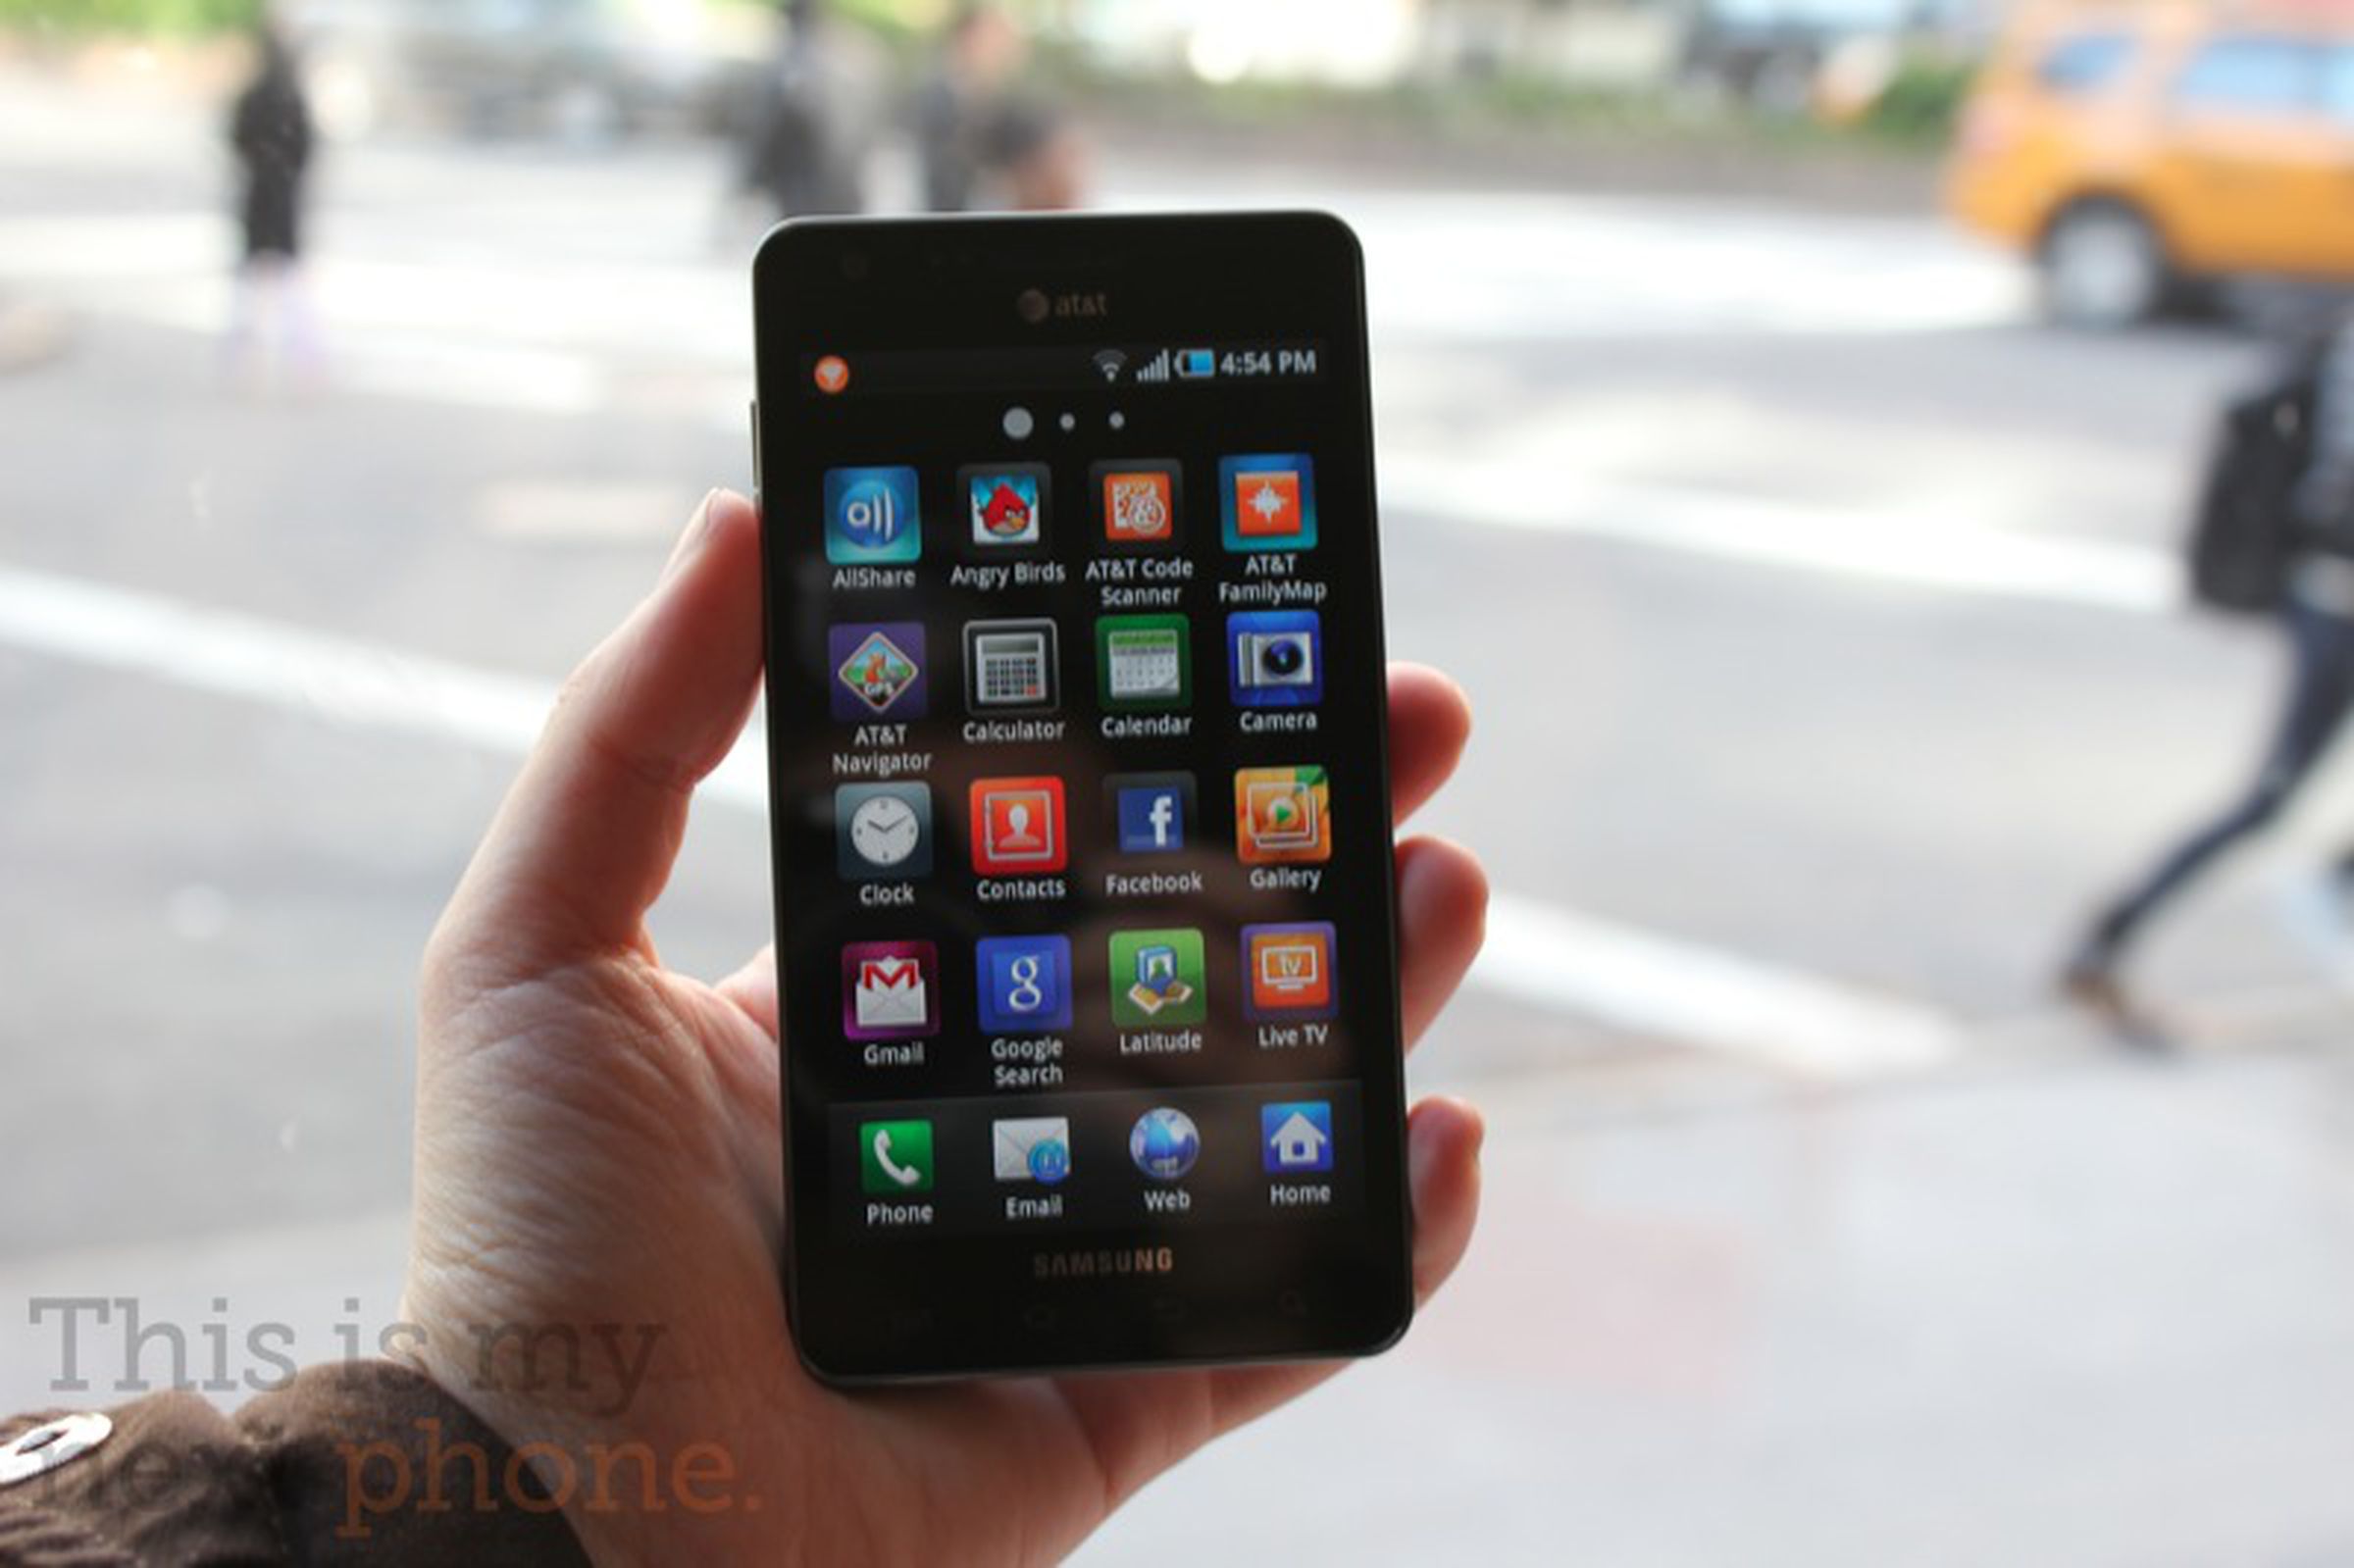 Samsung Infuse 4G for AT&T: unboxing and hands-on